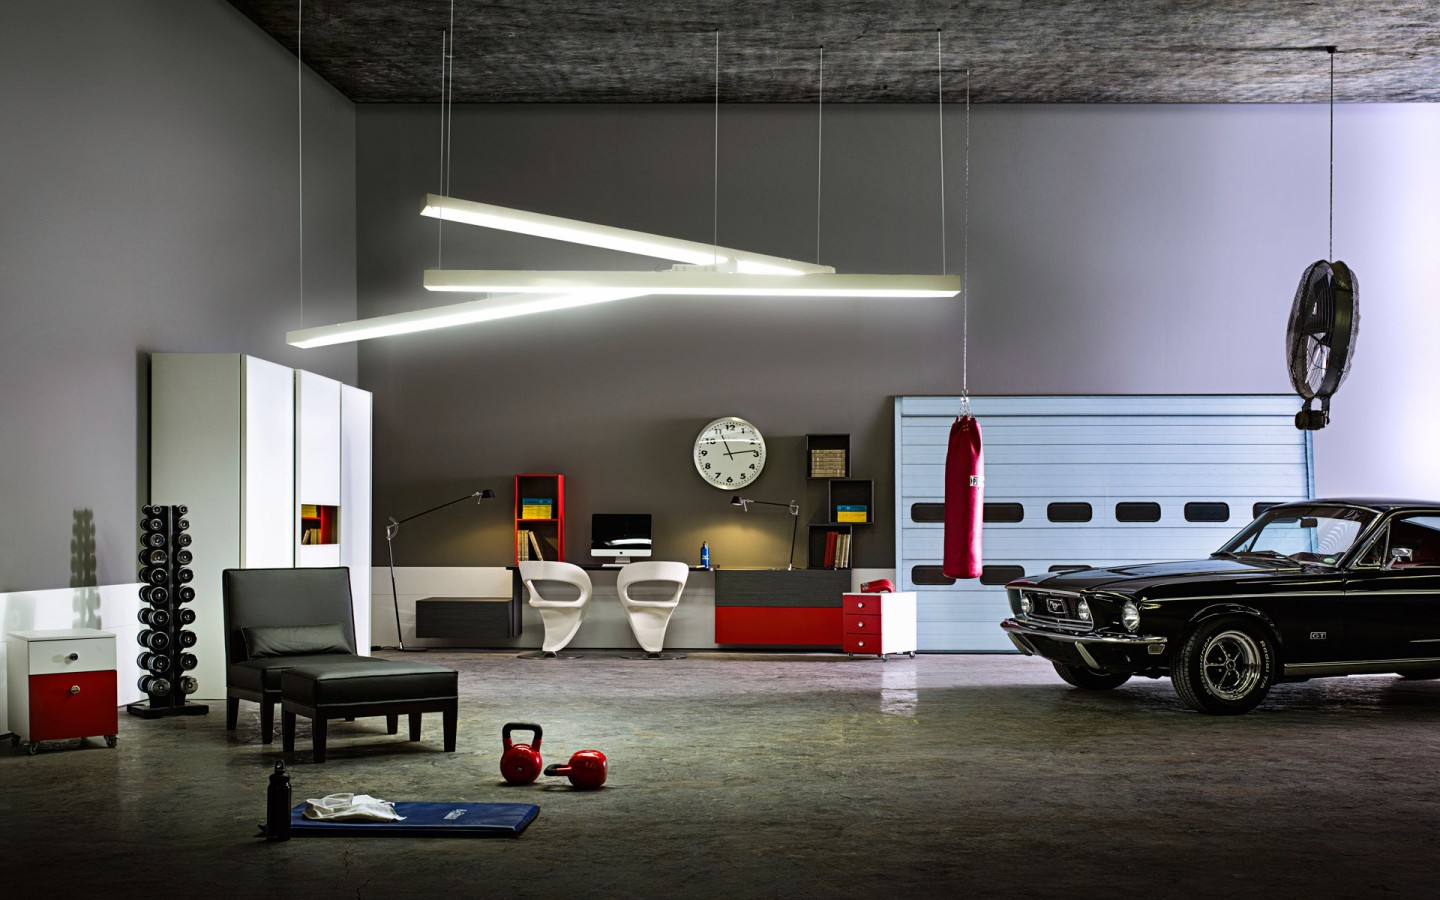 Design Ideas Style Fascinating Garage Design Ideas Using Interesting Contemporary Style With Concrete Flooring And Small Living Space For Inspiration Decoration Garage Design Ideas With Cabinet And Hanger Compartment For The Sake Of Good Arrangement